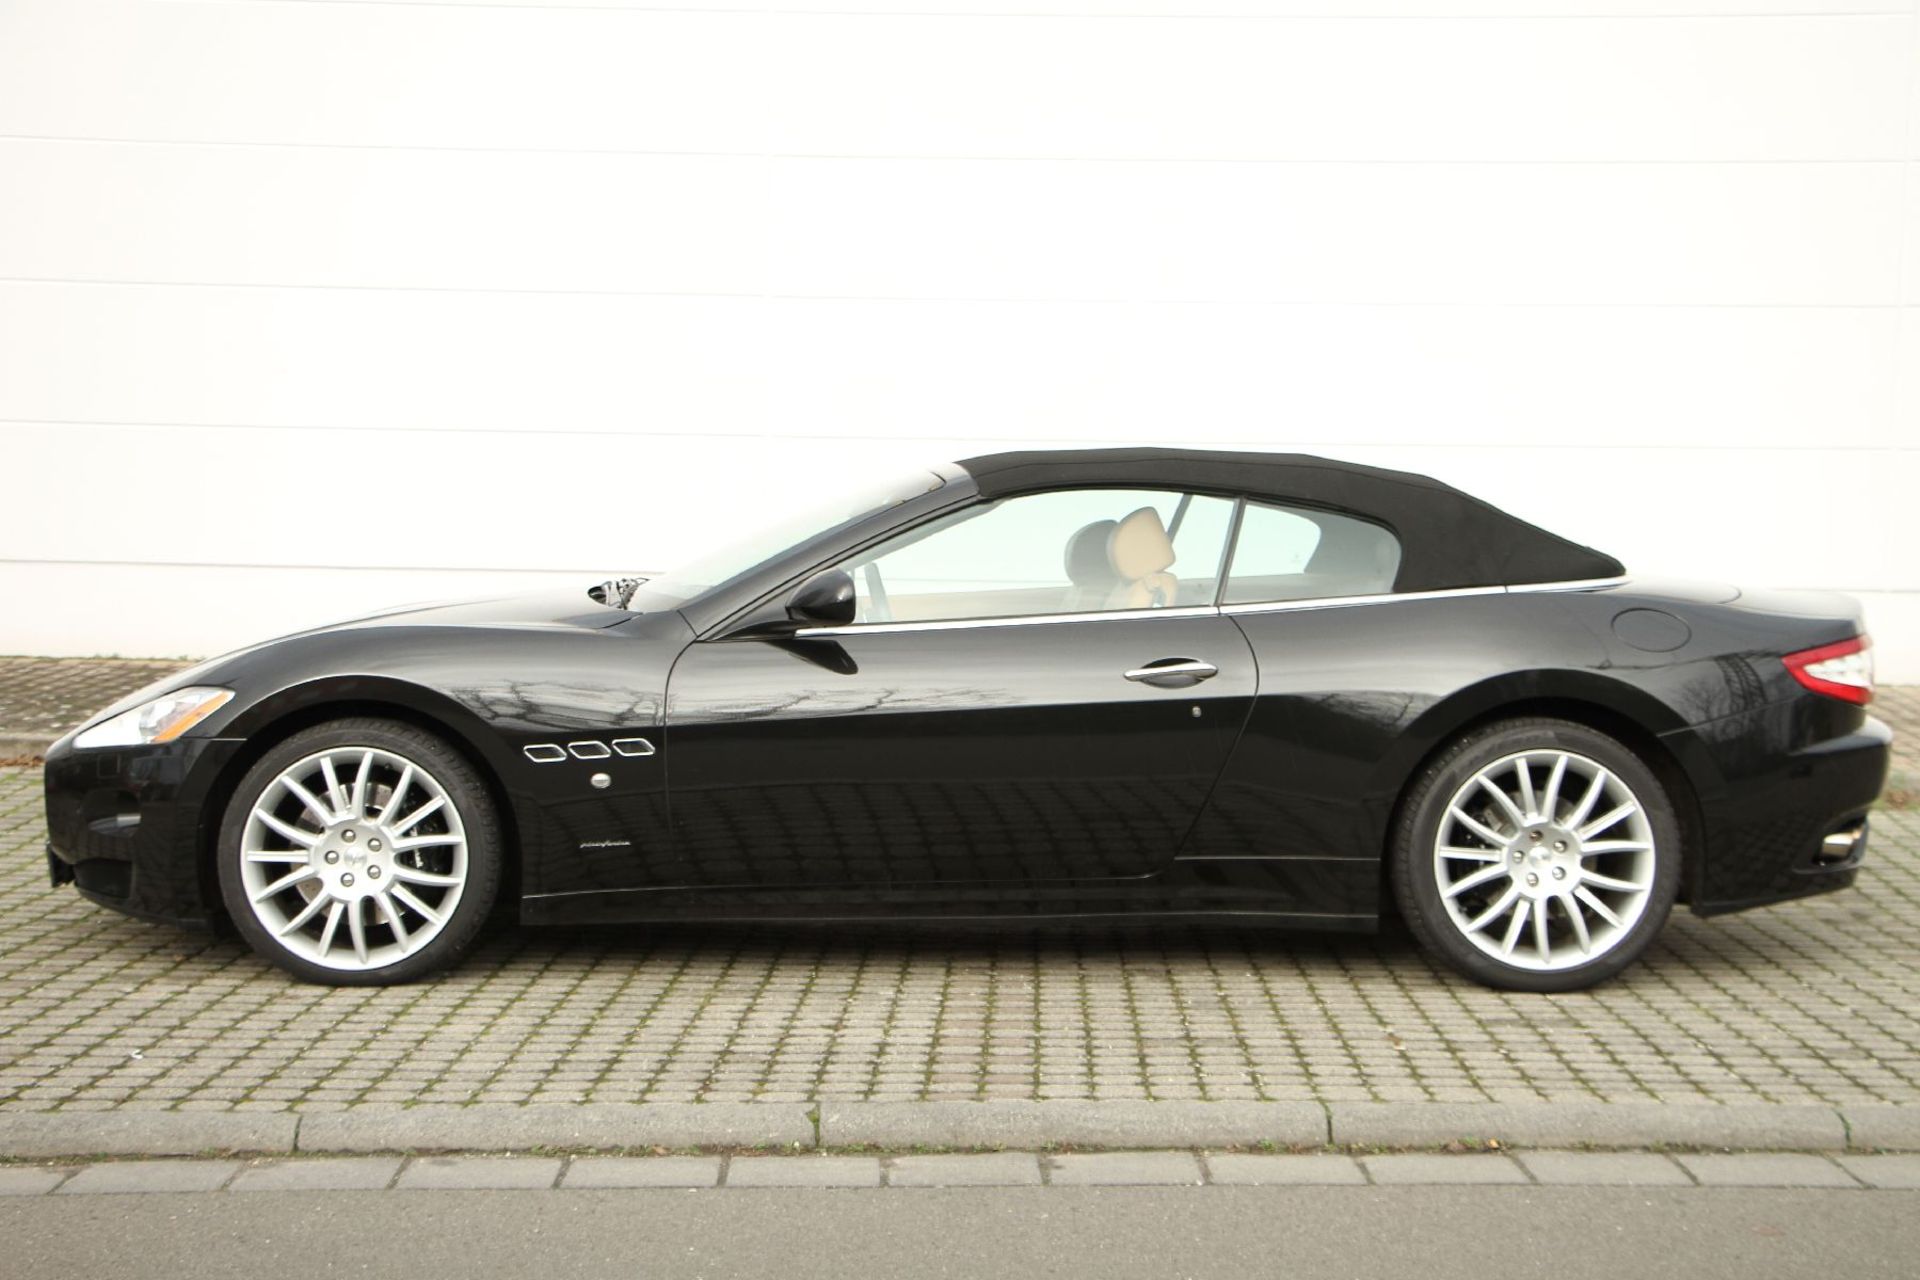 Maserati Grand Cabrio, Chassis Number: ZAMKM45B000052657, first registered 04/2010, two owners, - Bild 3 aus 15